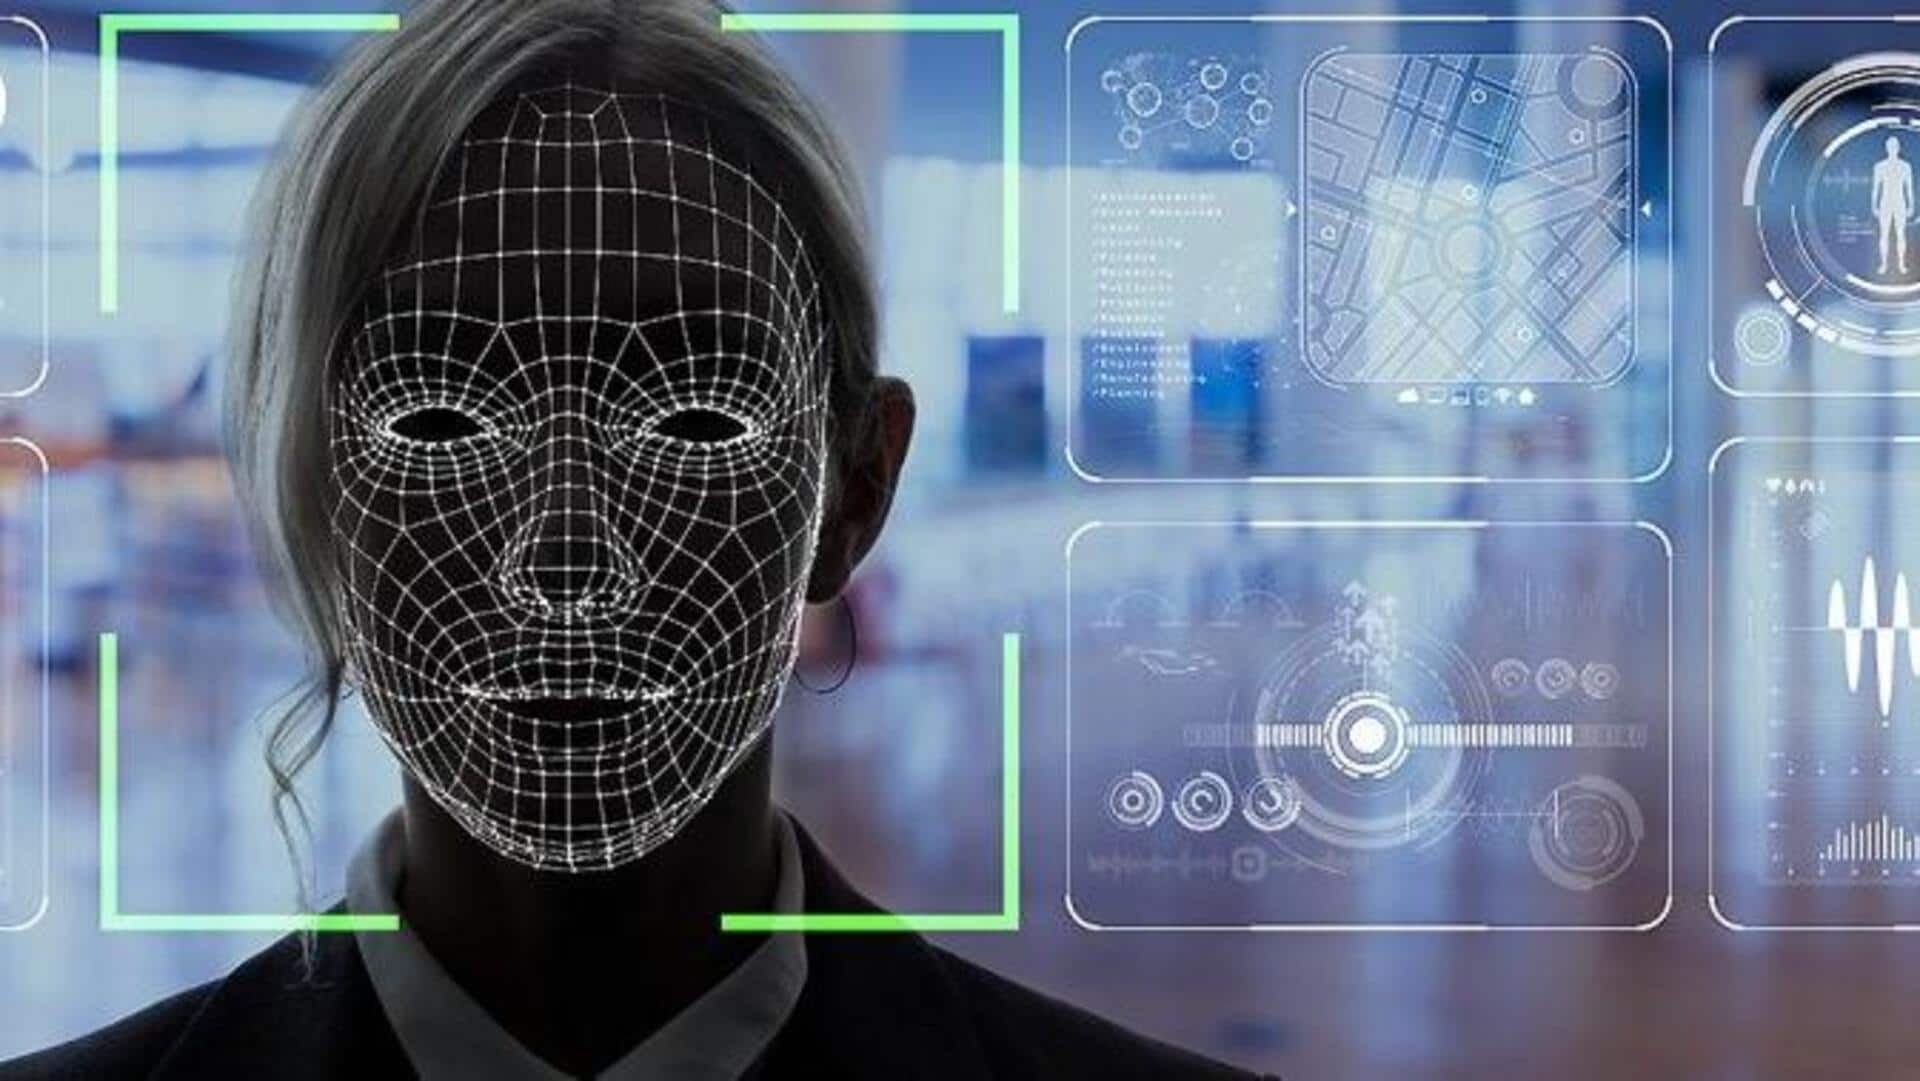 China plans to regulate facial recognition technology: Here's how